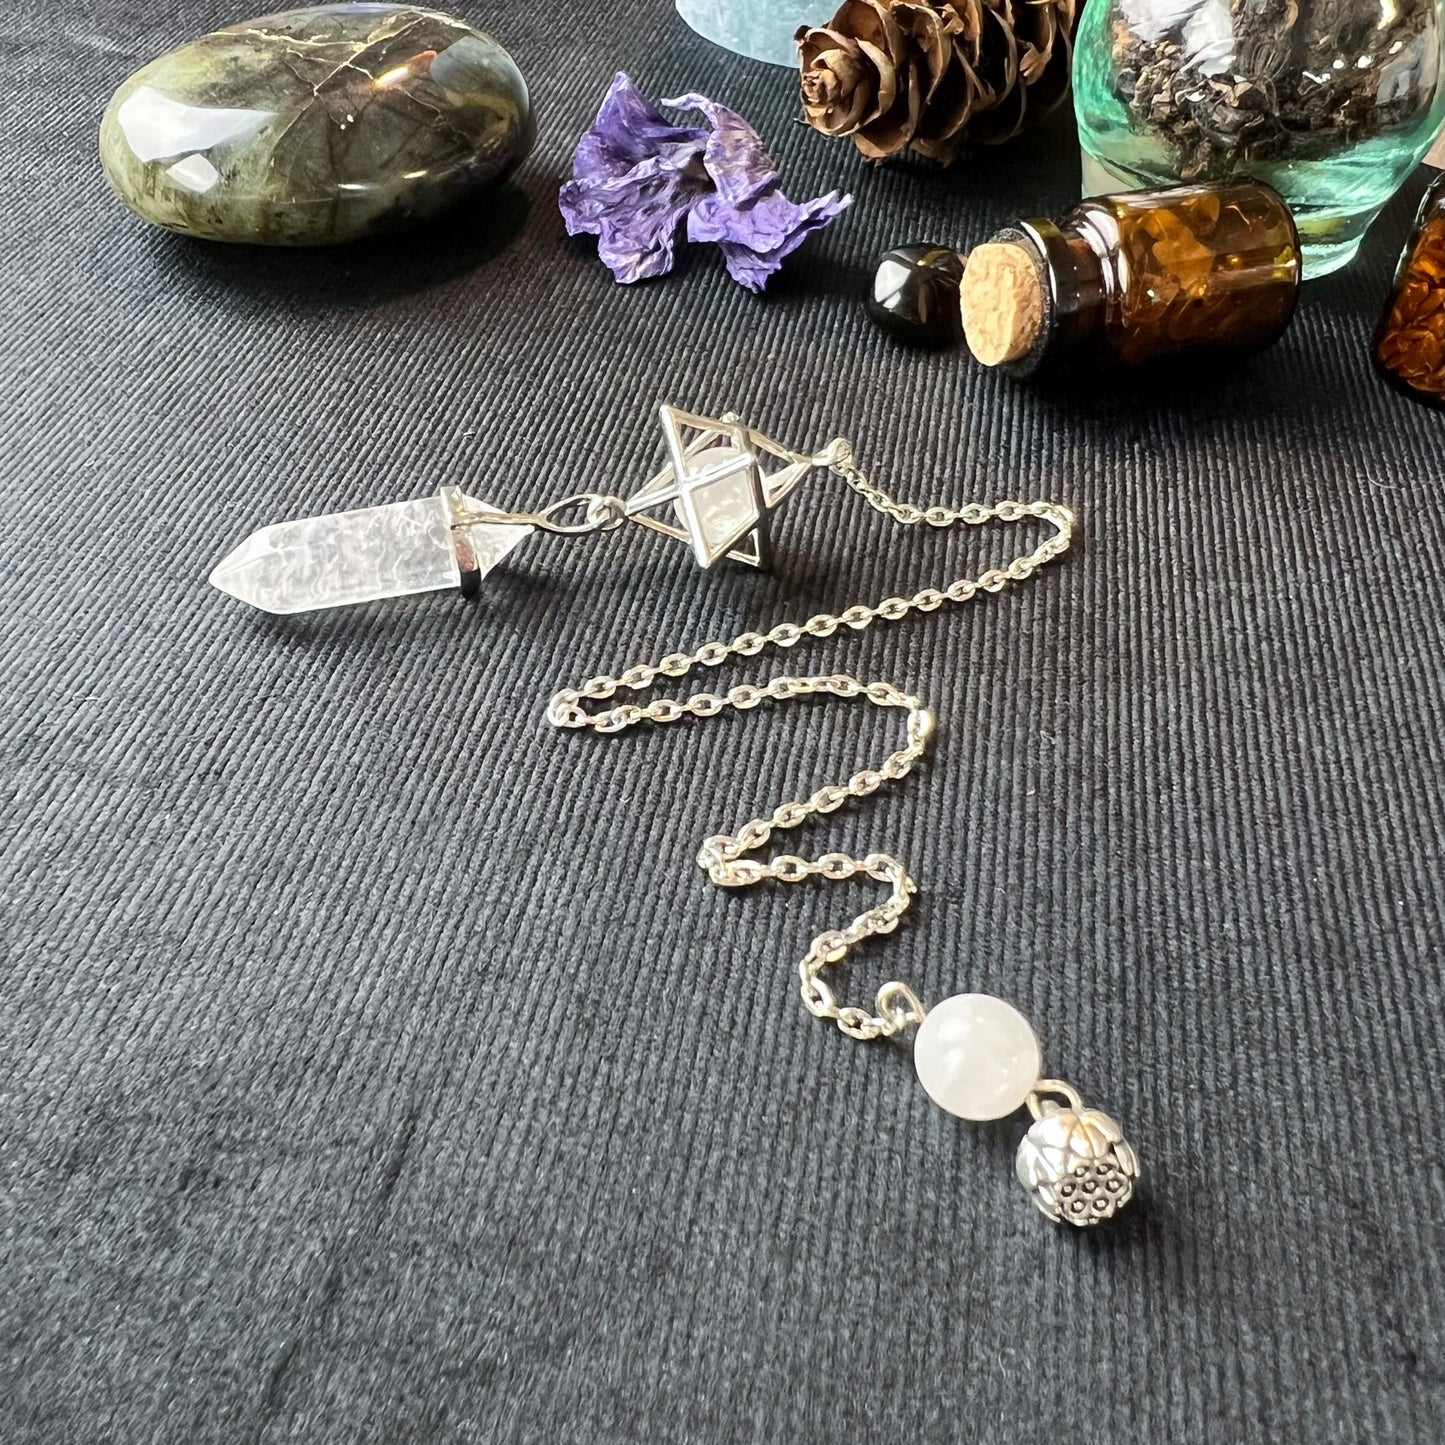 Clear quartz Merkaba and lotus seed divination pendulum - The French Witch shop